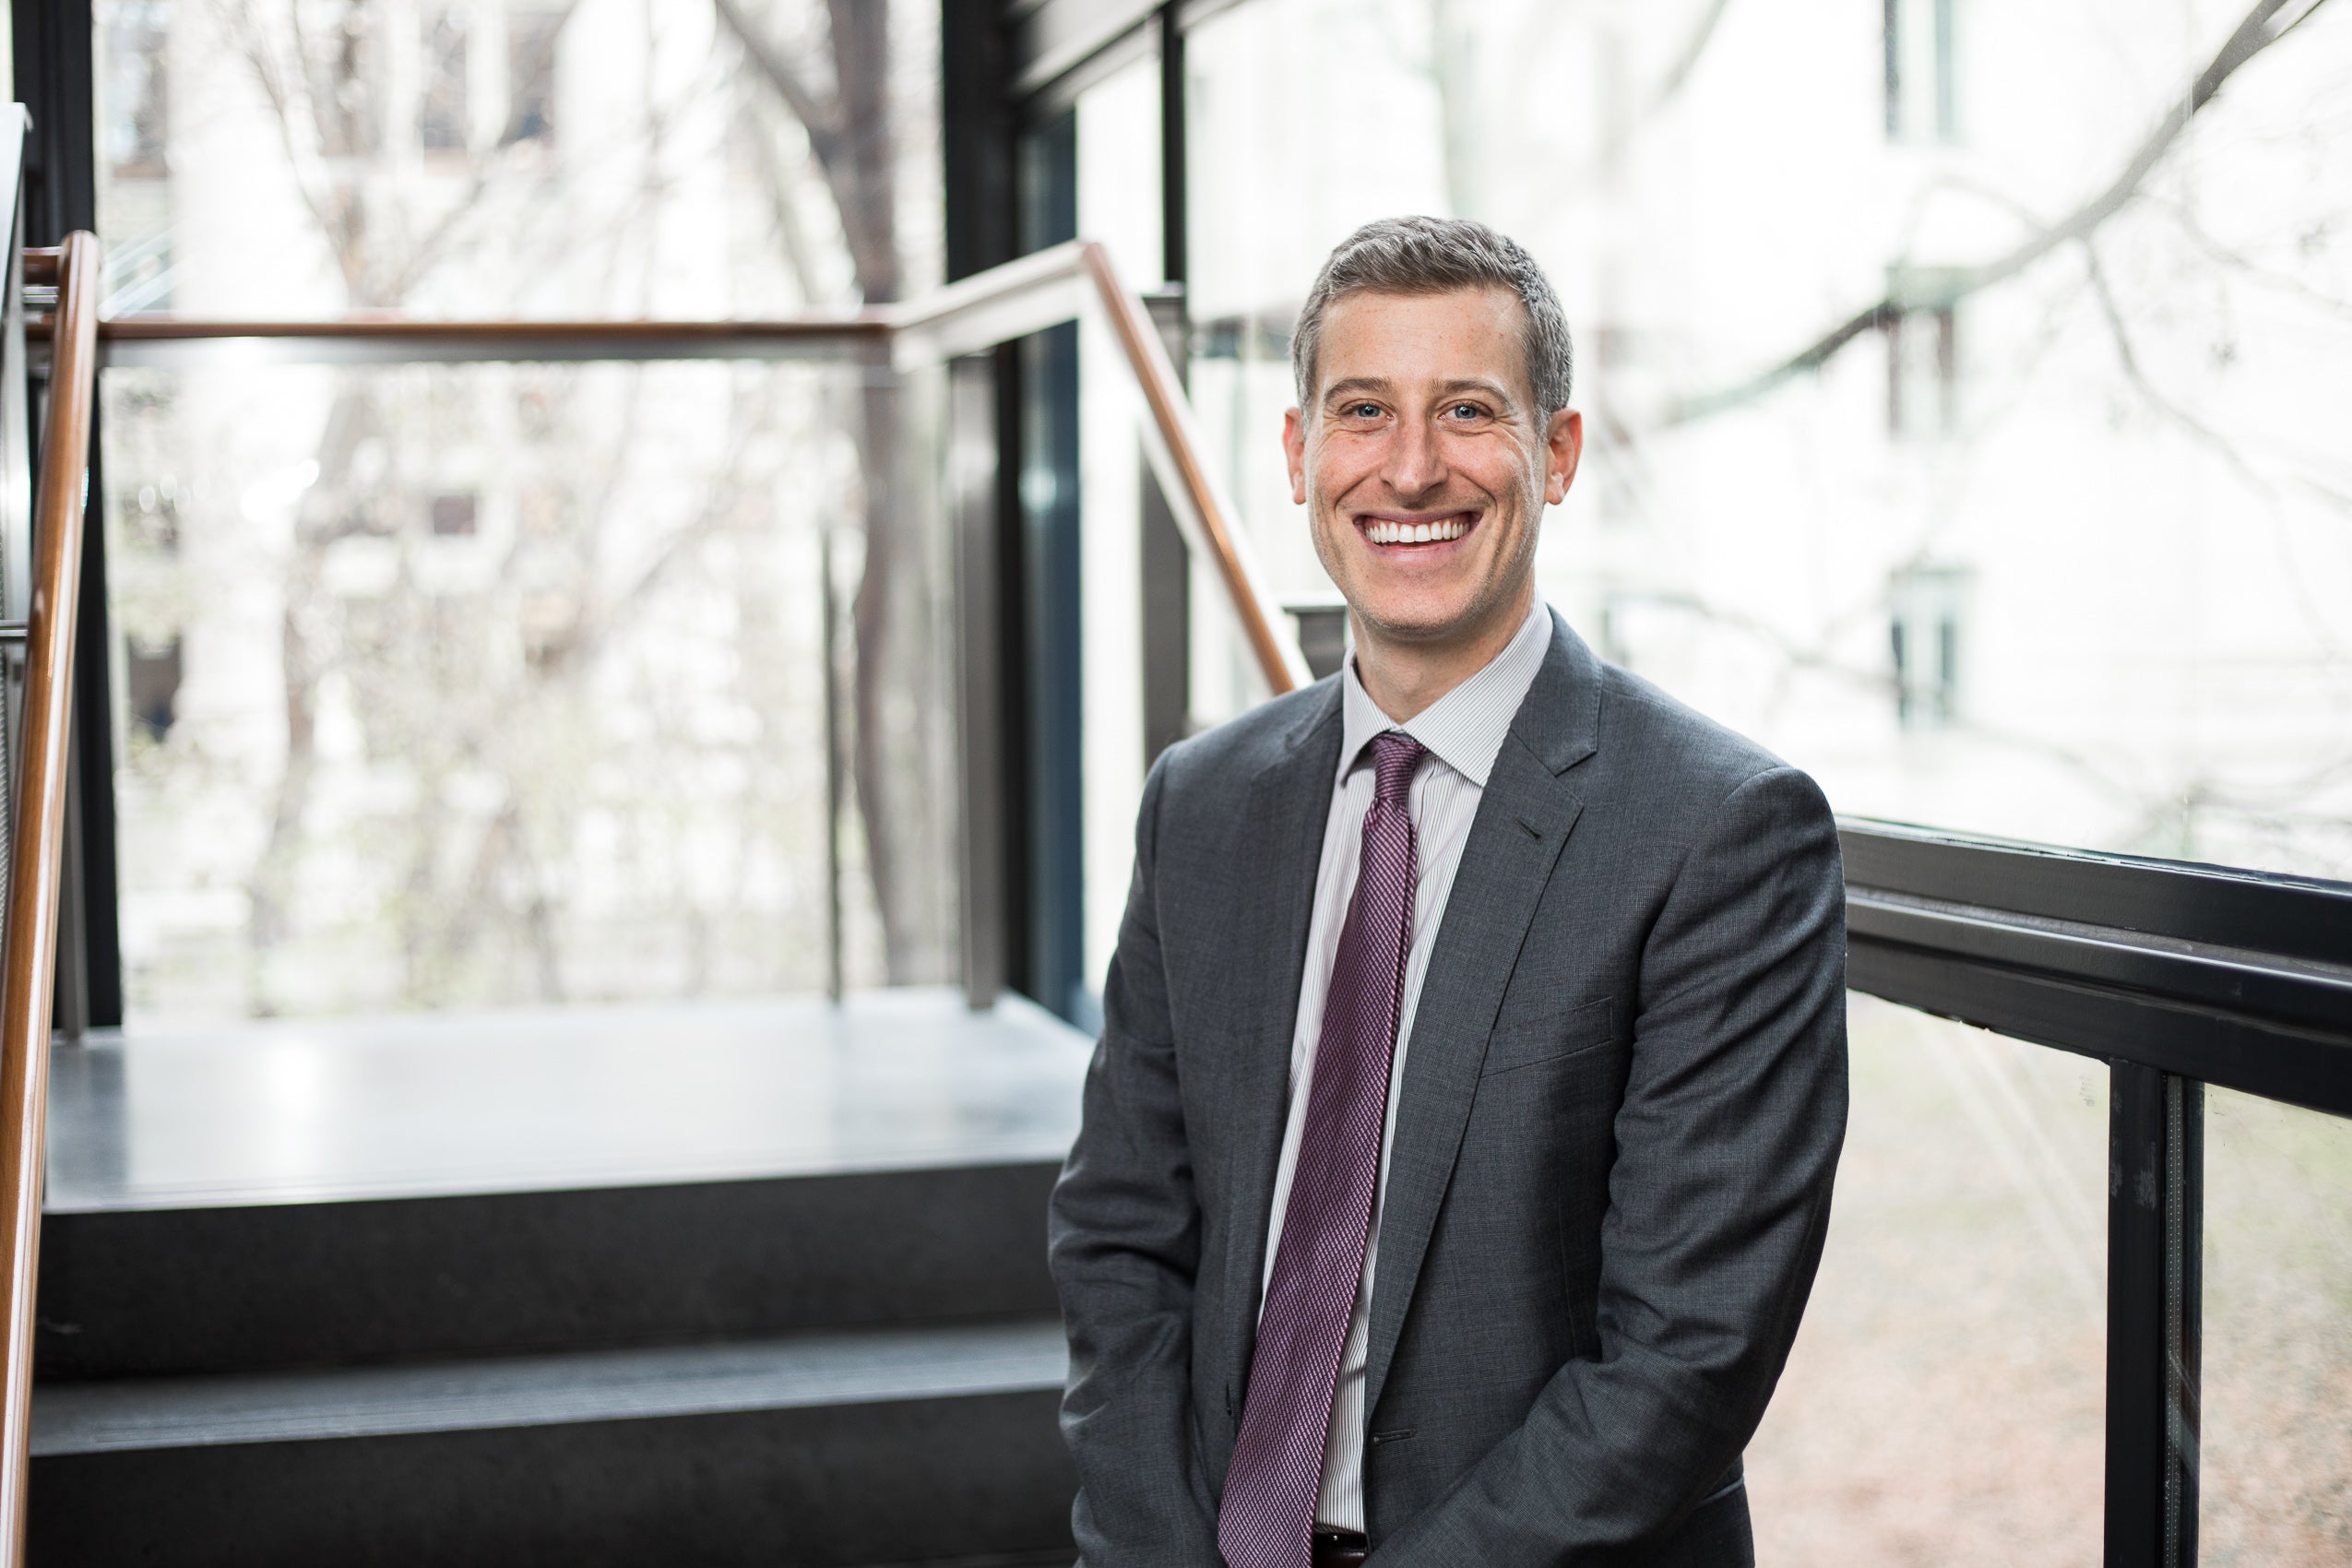 Adam Sherman joins HLS as assistant dean for Academic and Faculty Affairs